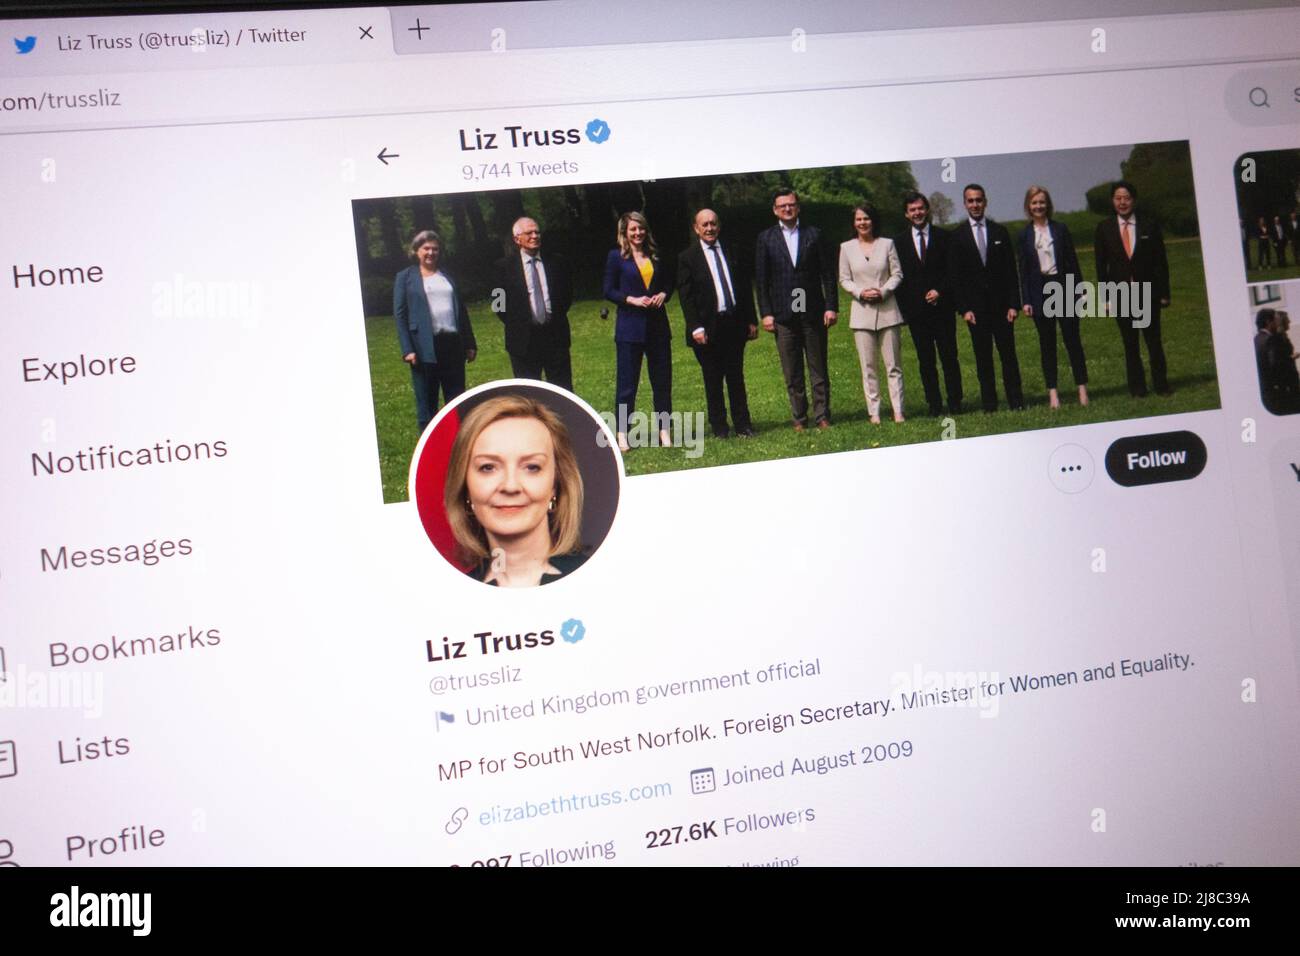 KONSKIE, POLAND - May 14, 2022: Elizabeth Truss official Twitter account displayed on laptop screen Stock Photo